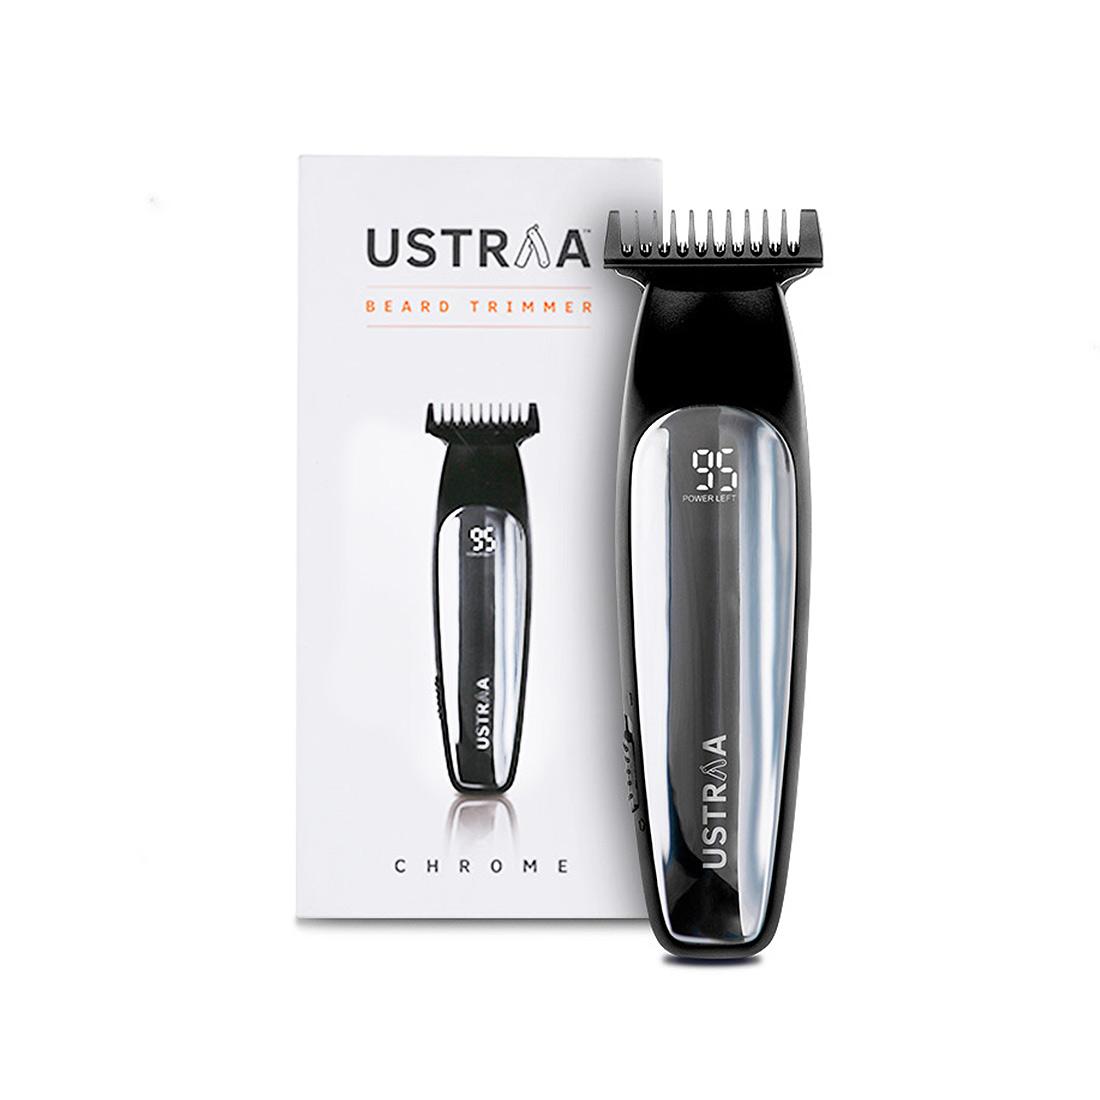 Ustraa Chrome Beard Trimmer for Men, Lithium Ion Powered Trimmers with an LCD Display, works as Hair Clippers, 2 Year Warranty